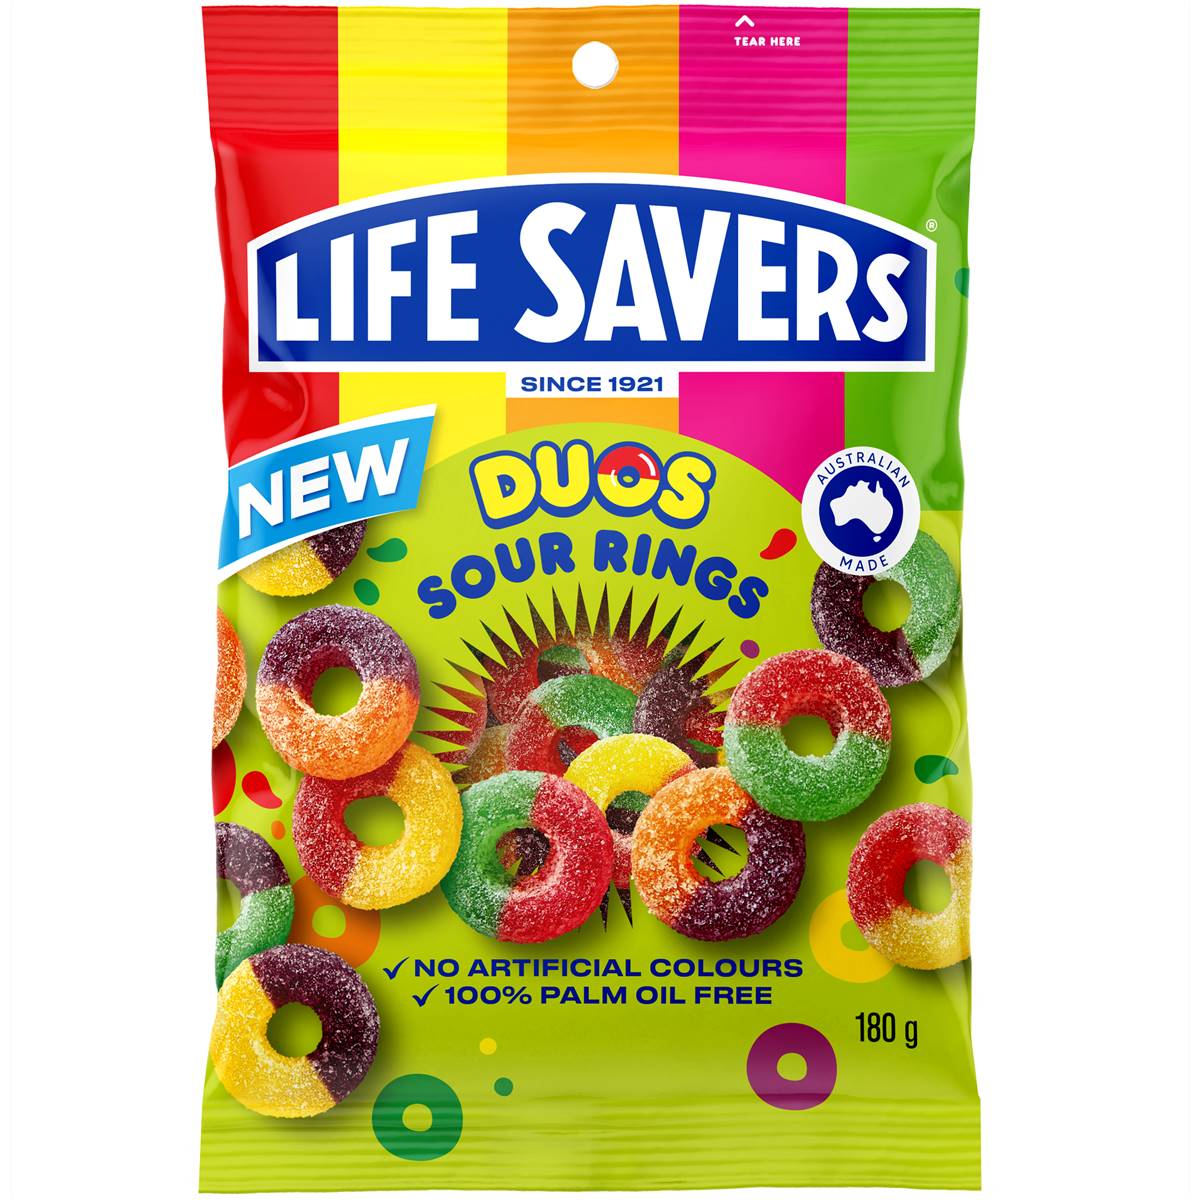 Calories in Lifesavers Duos Sour Rings Share Bag